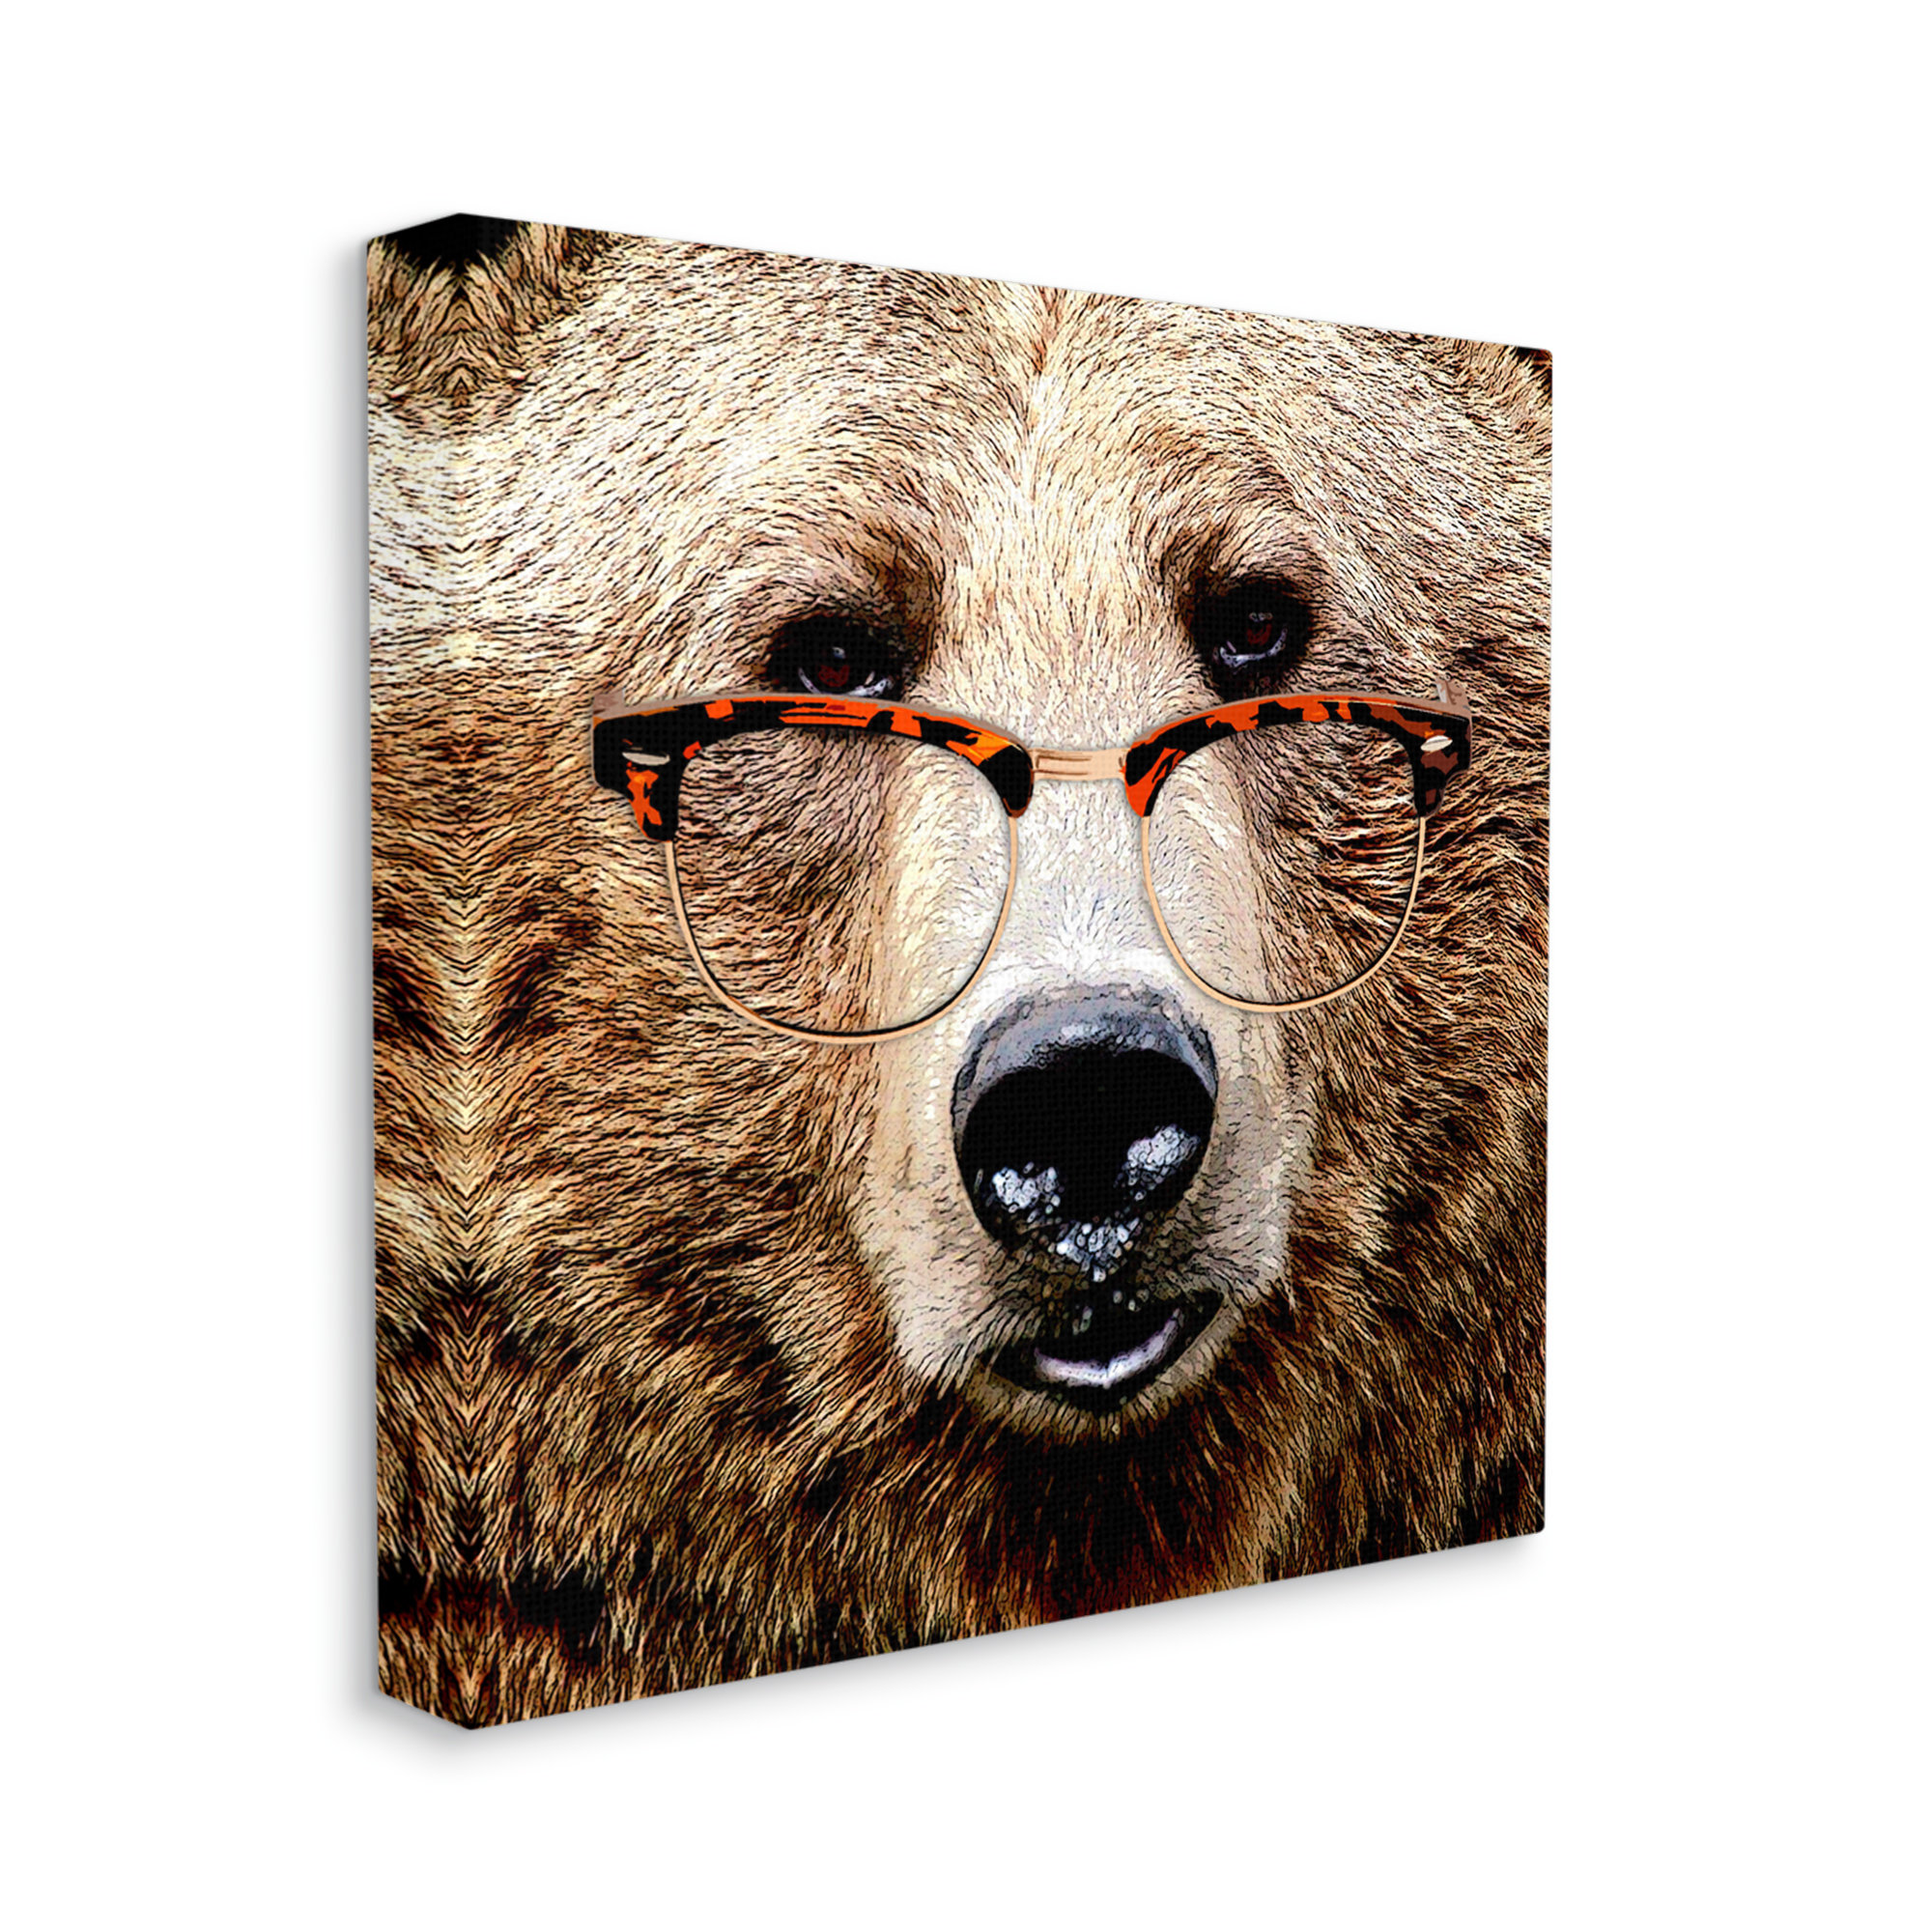 Stupell Industries Wildlife Grizzly Bear Glasses On Canvas by Karen Smith  Print